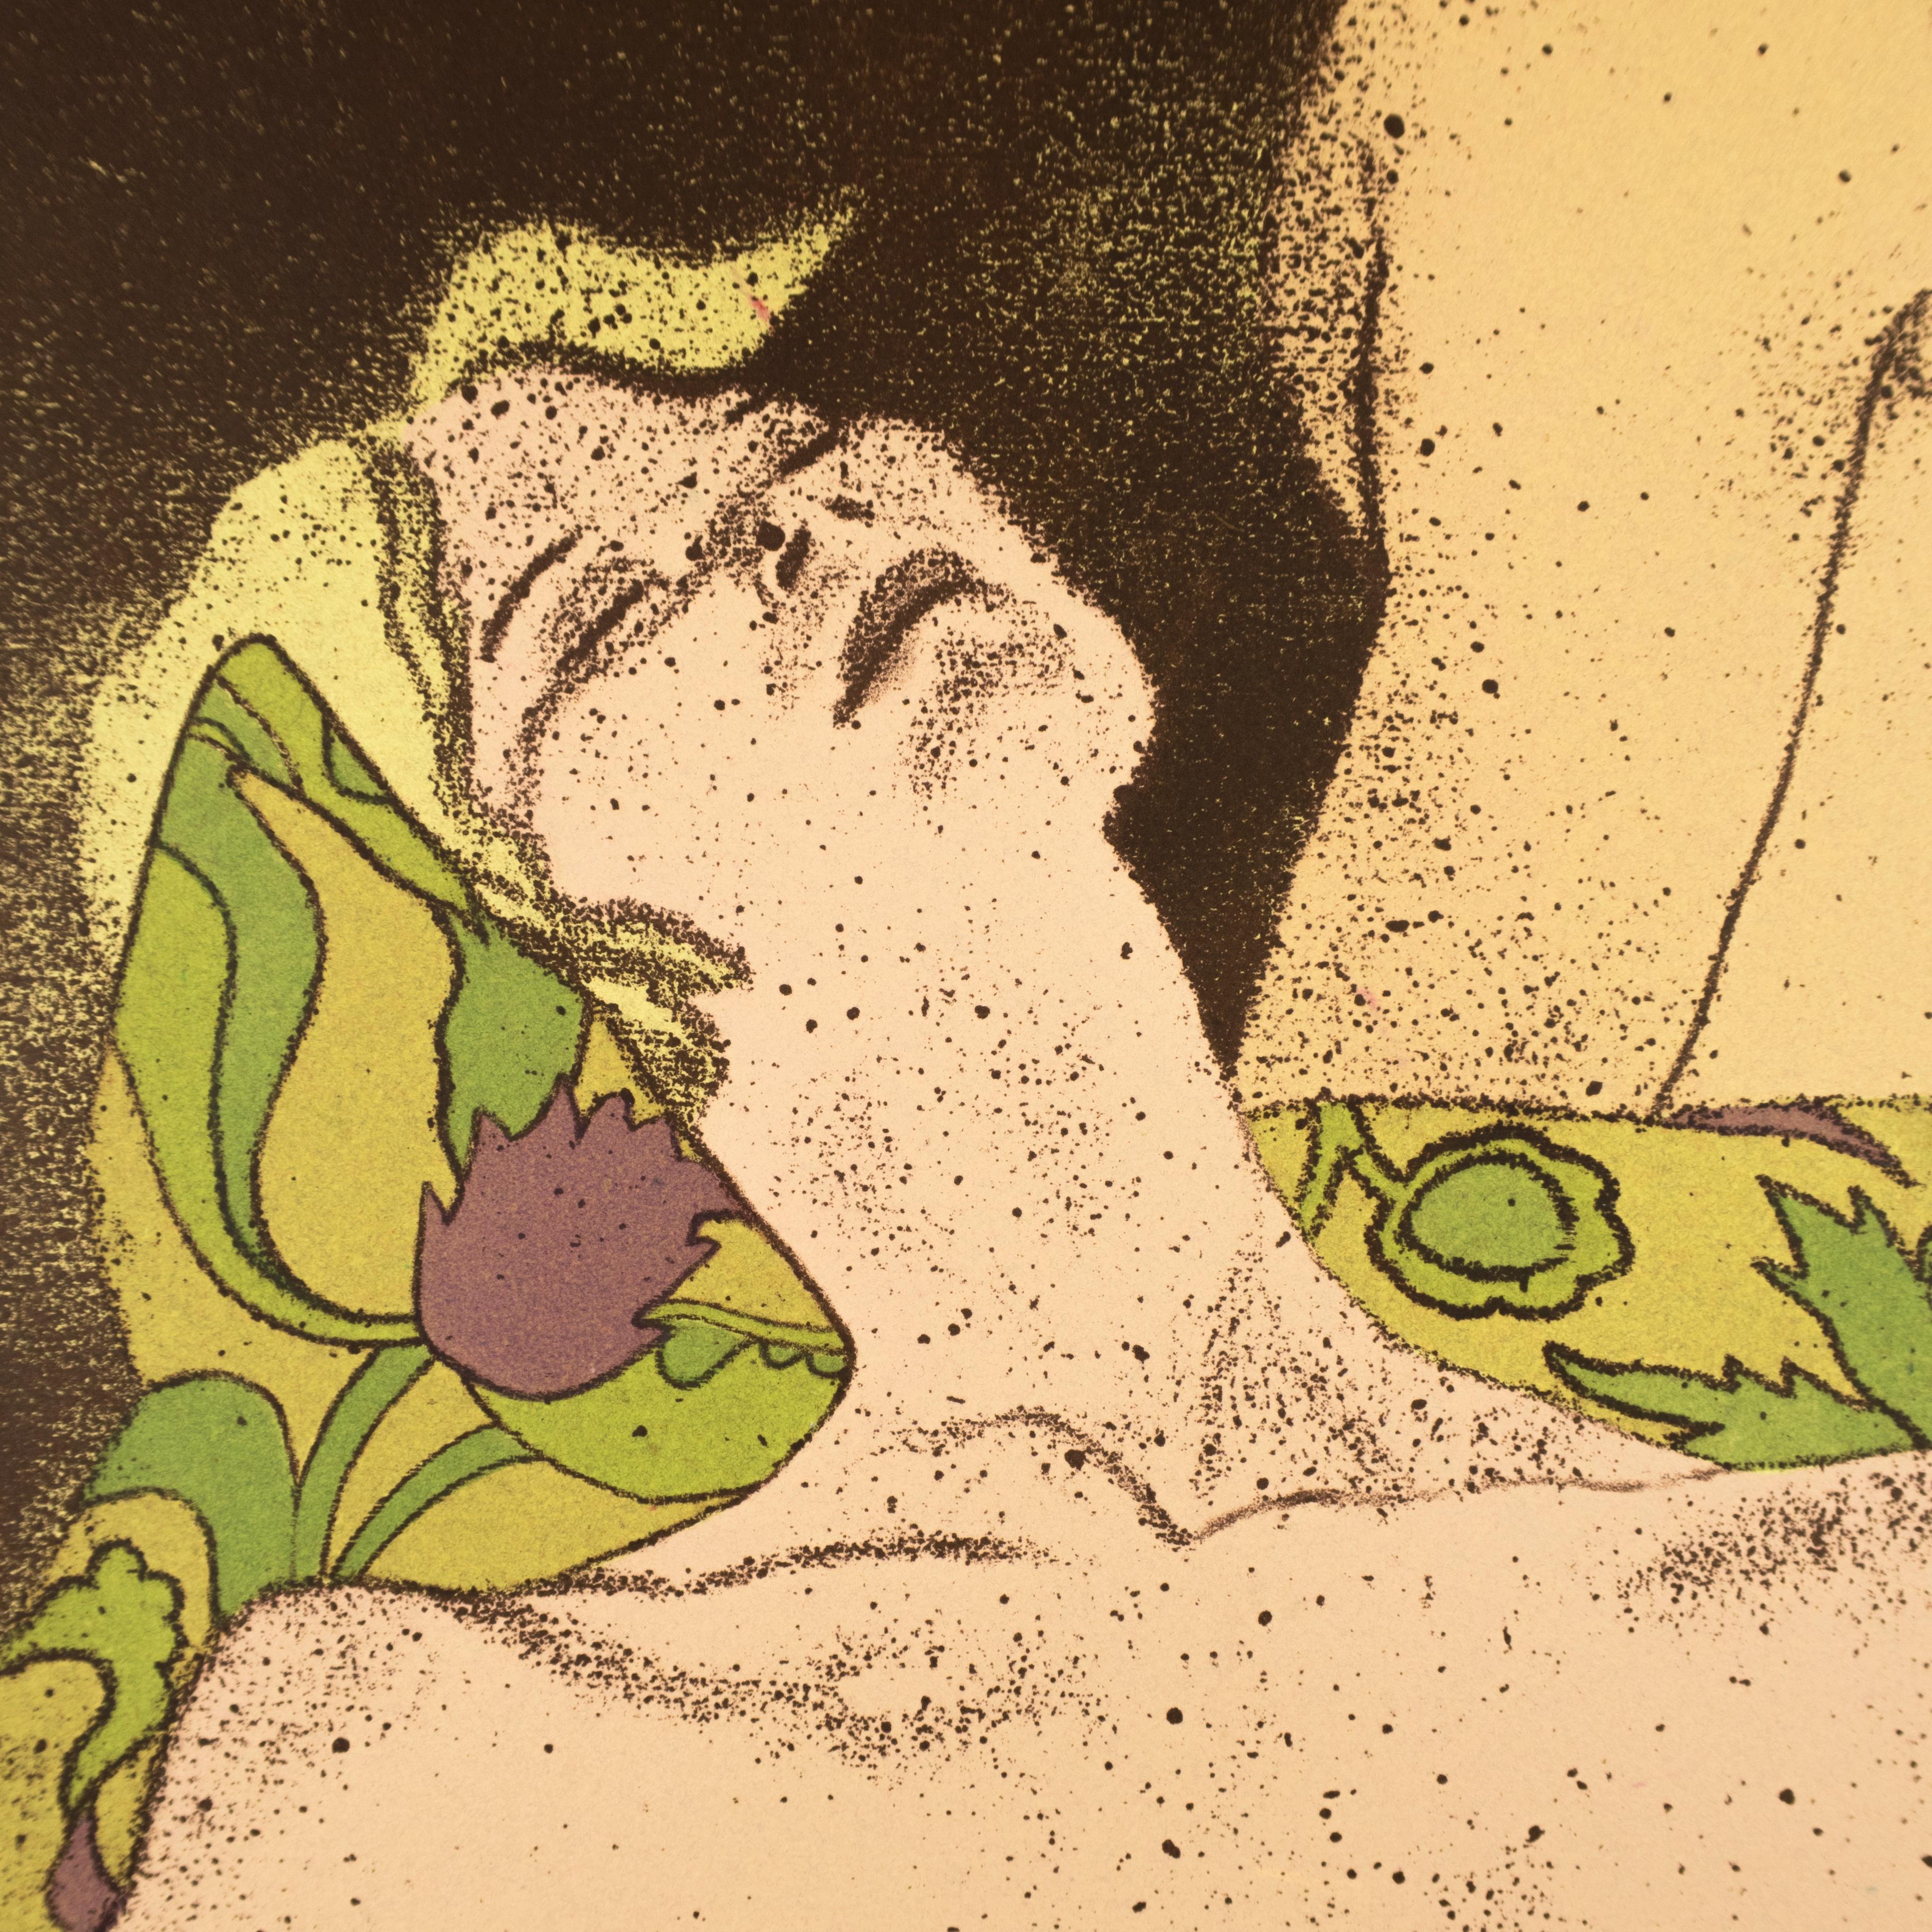 A colorful erotic daydream drawing of a nude blonde fantasizing, with a redhead woman, and man. Green and purple patterns on hair and pillows, and art deco motifs, adorn this sensual print. A nude woman reclines, her eyes closed in apparent ecstasy,